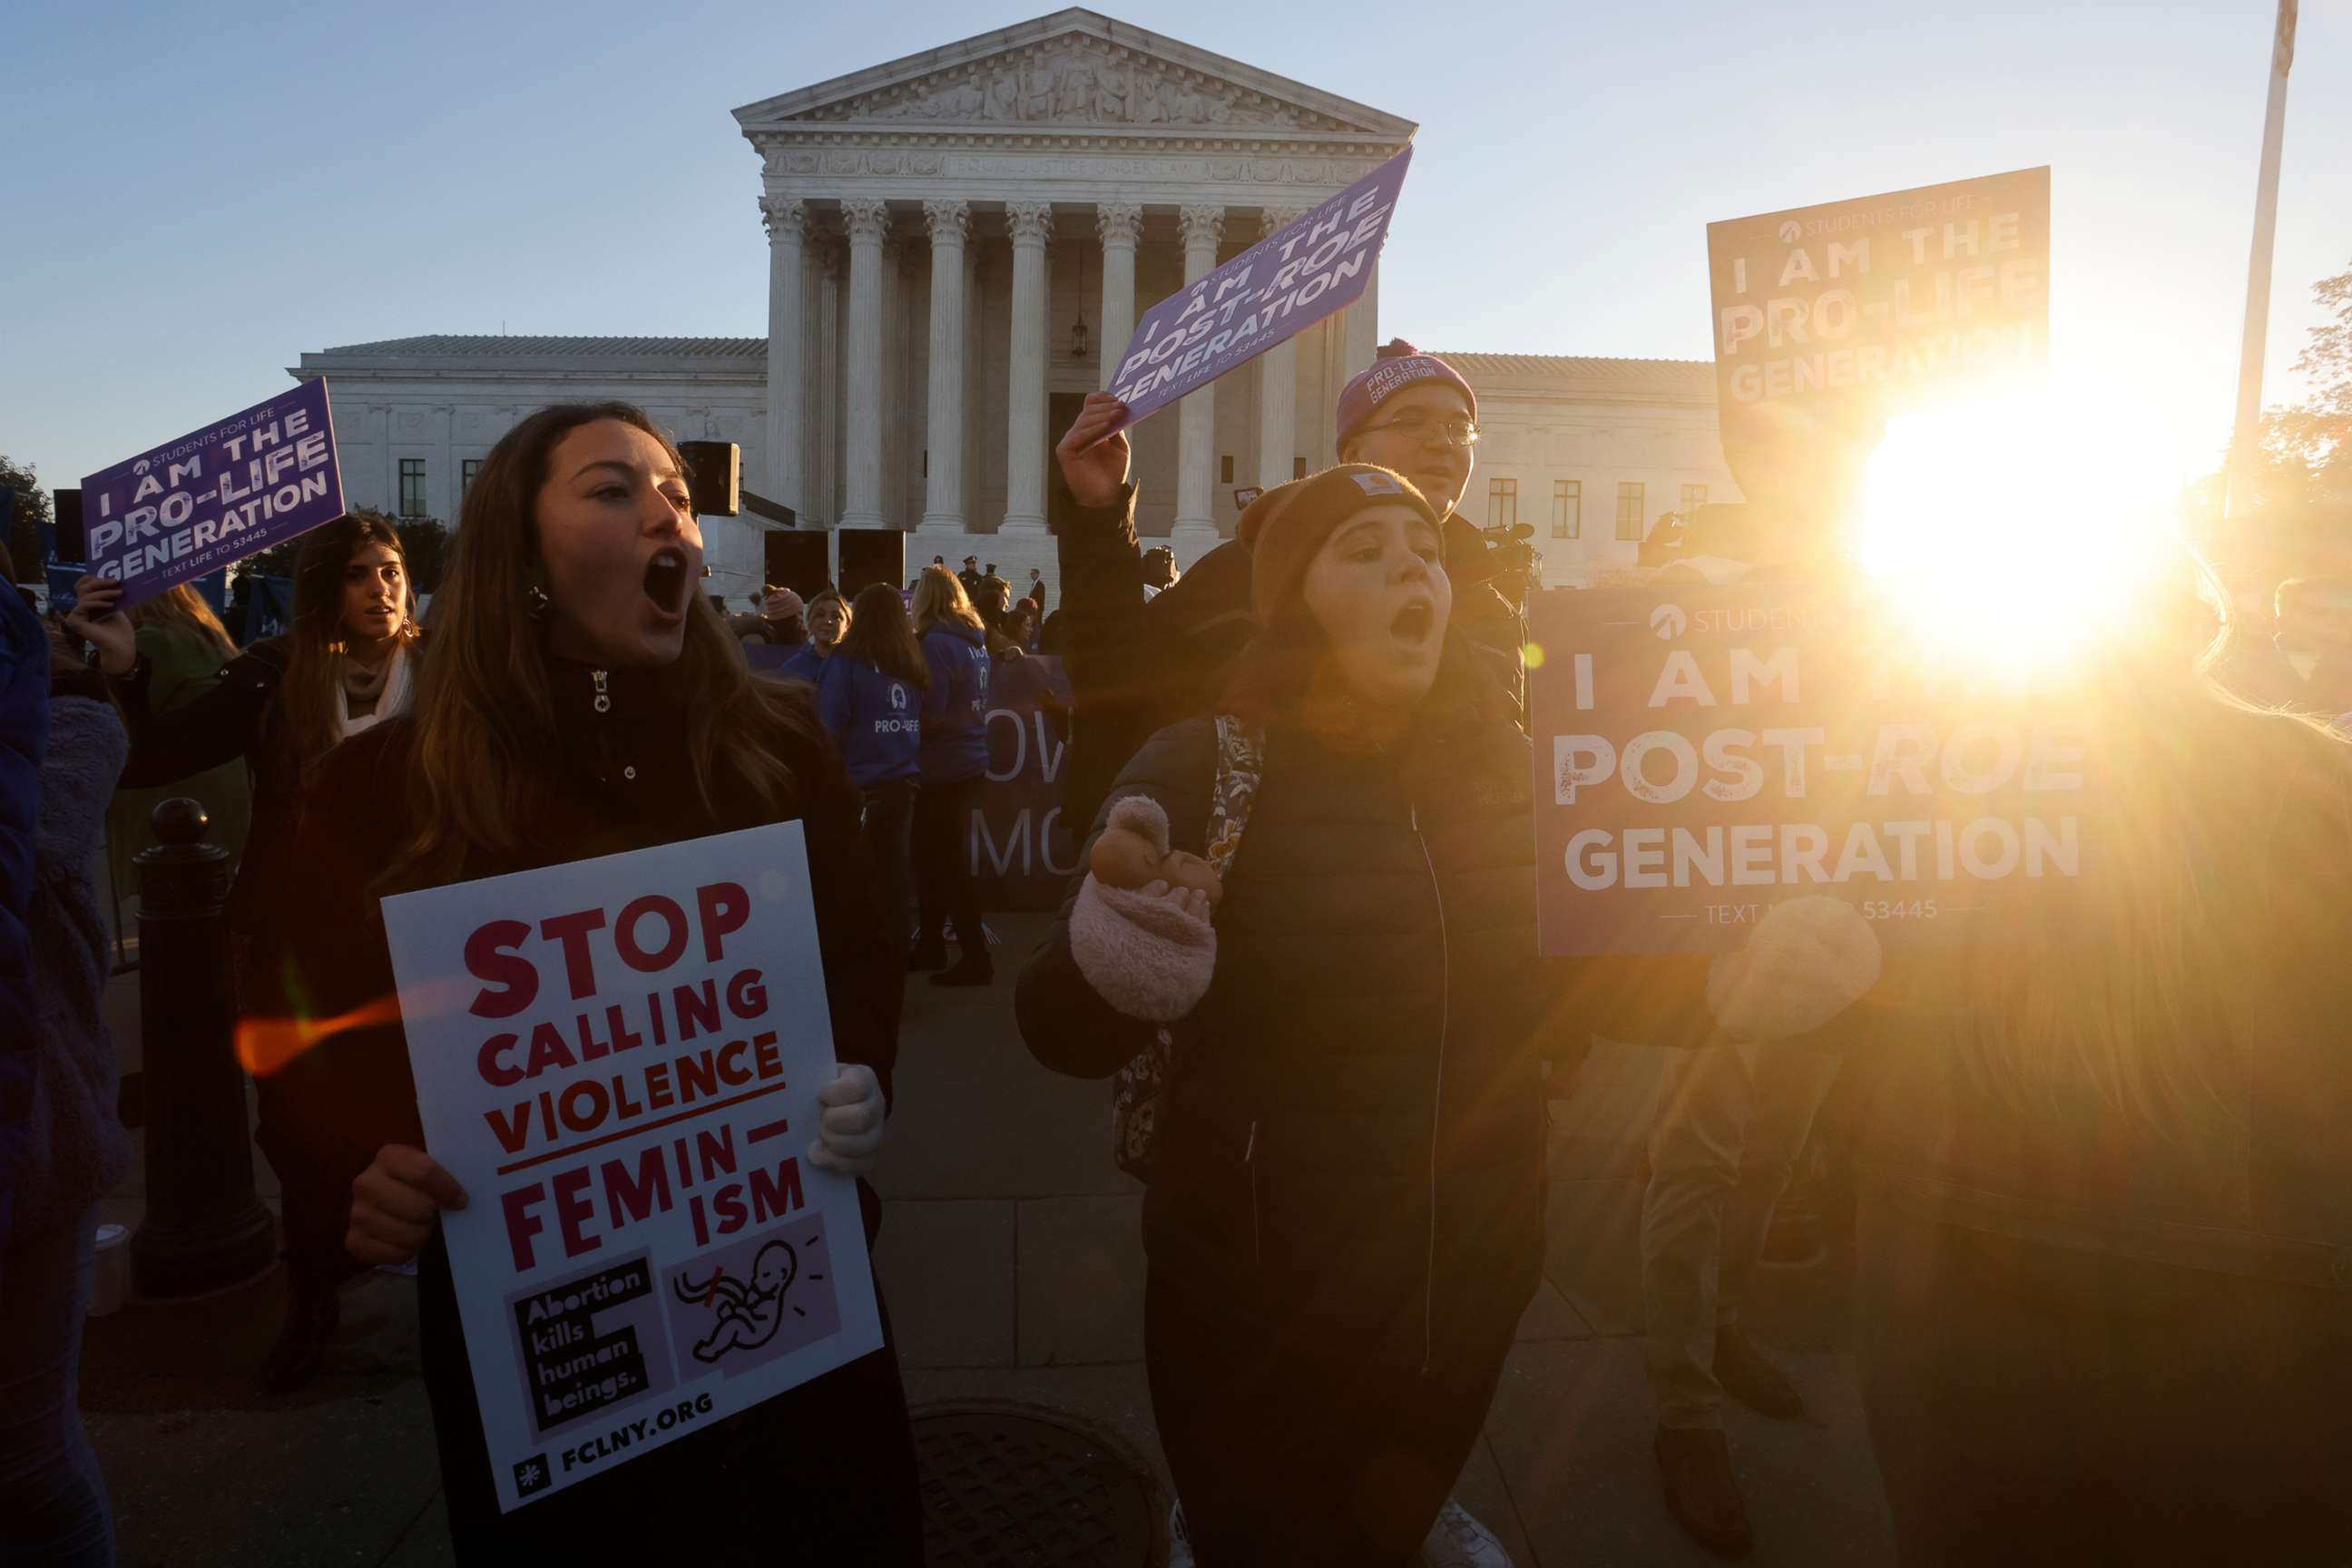 PHOTO: Anti-abortion rights activists protest outside the Supreme Court building, ahead of arguments in the Mississippi abortion rights case Dobbs v. Jackson Women's Health, in Washington, D.C., Dec. 1, 2021.